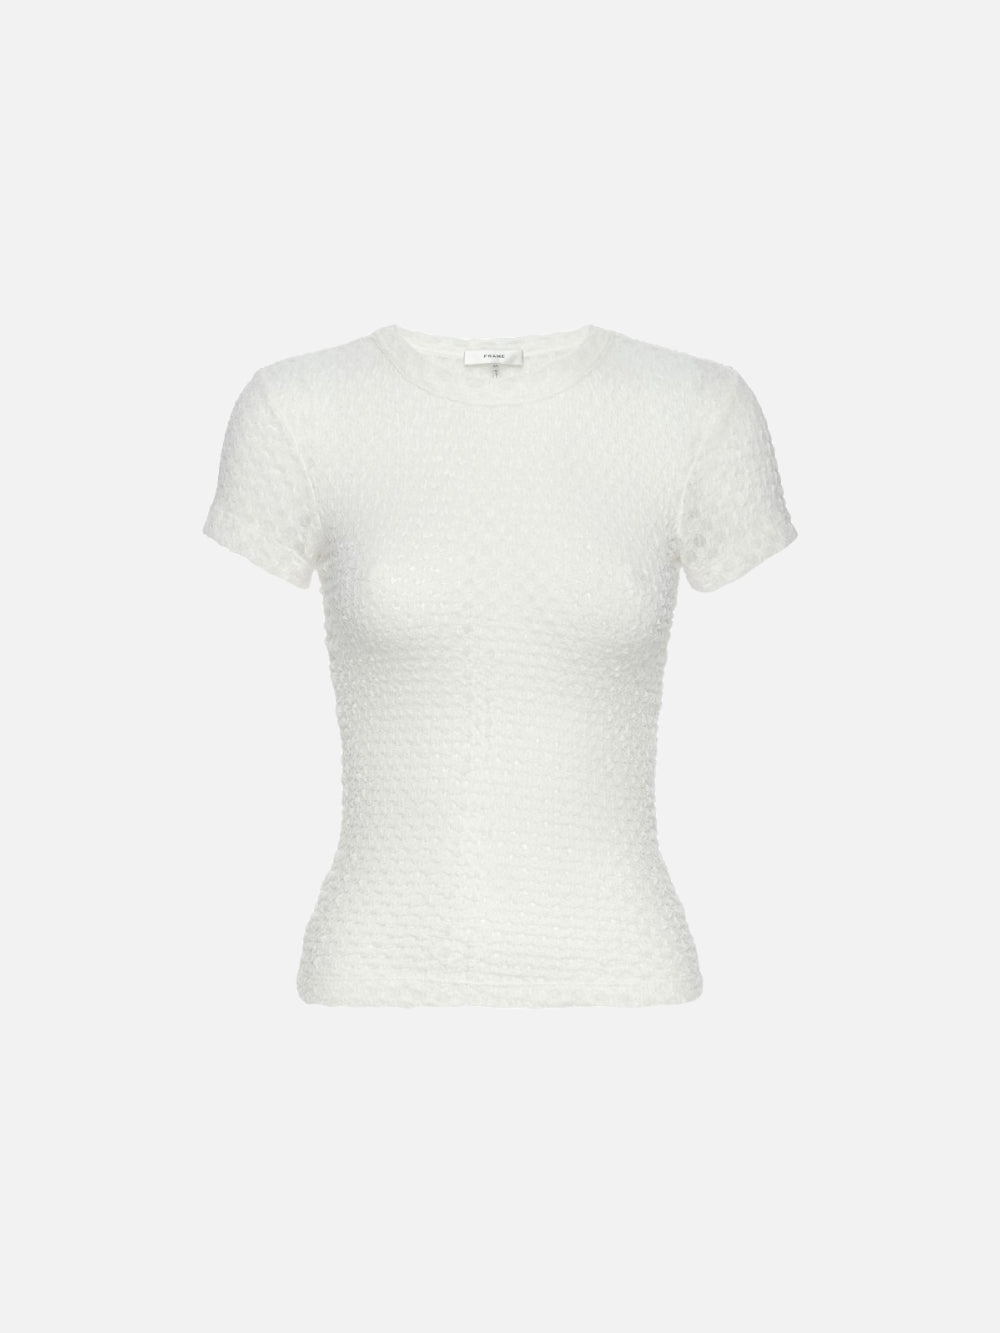 Mesh Lace Baby Tee in Off White - 1